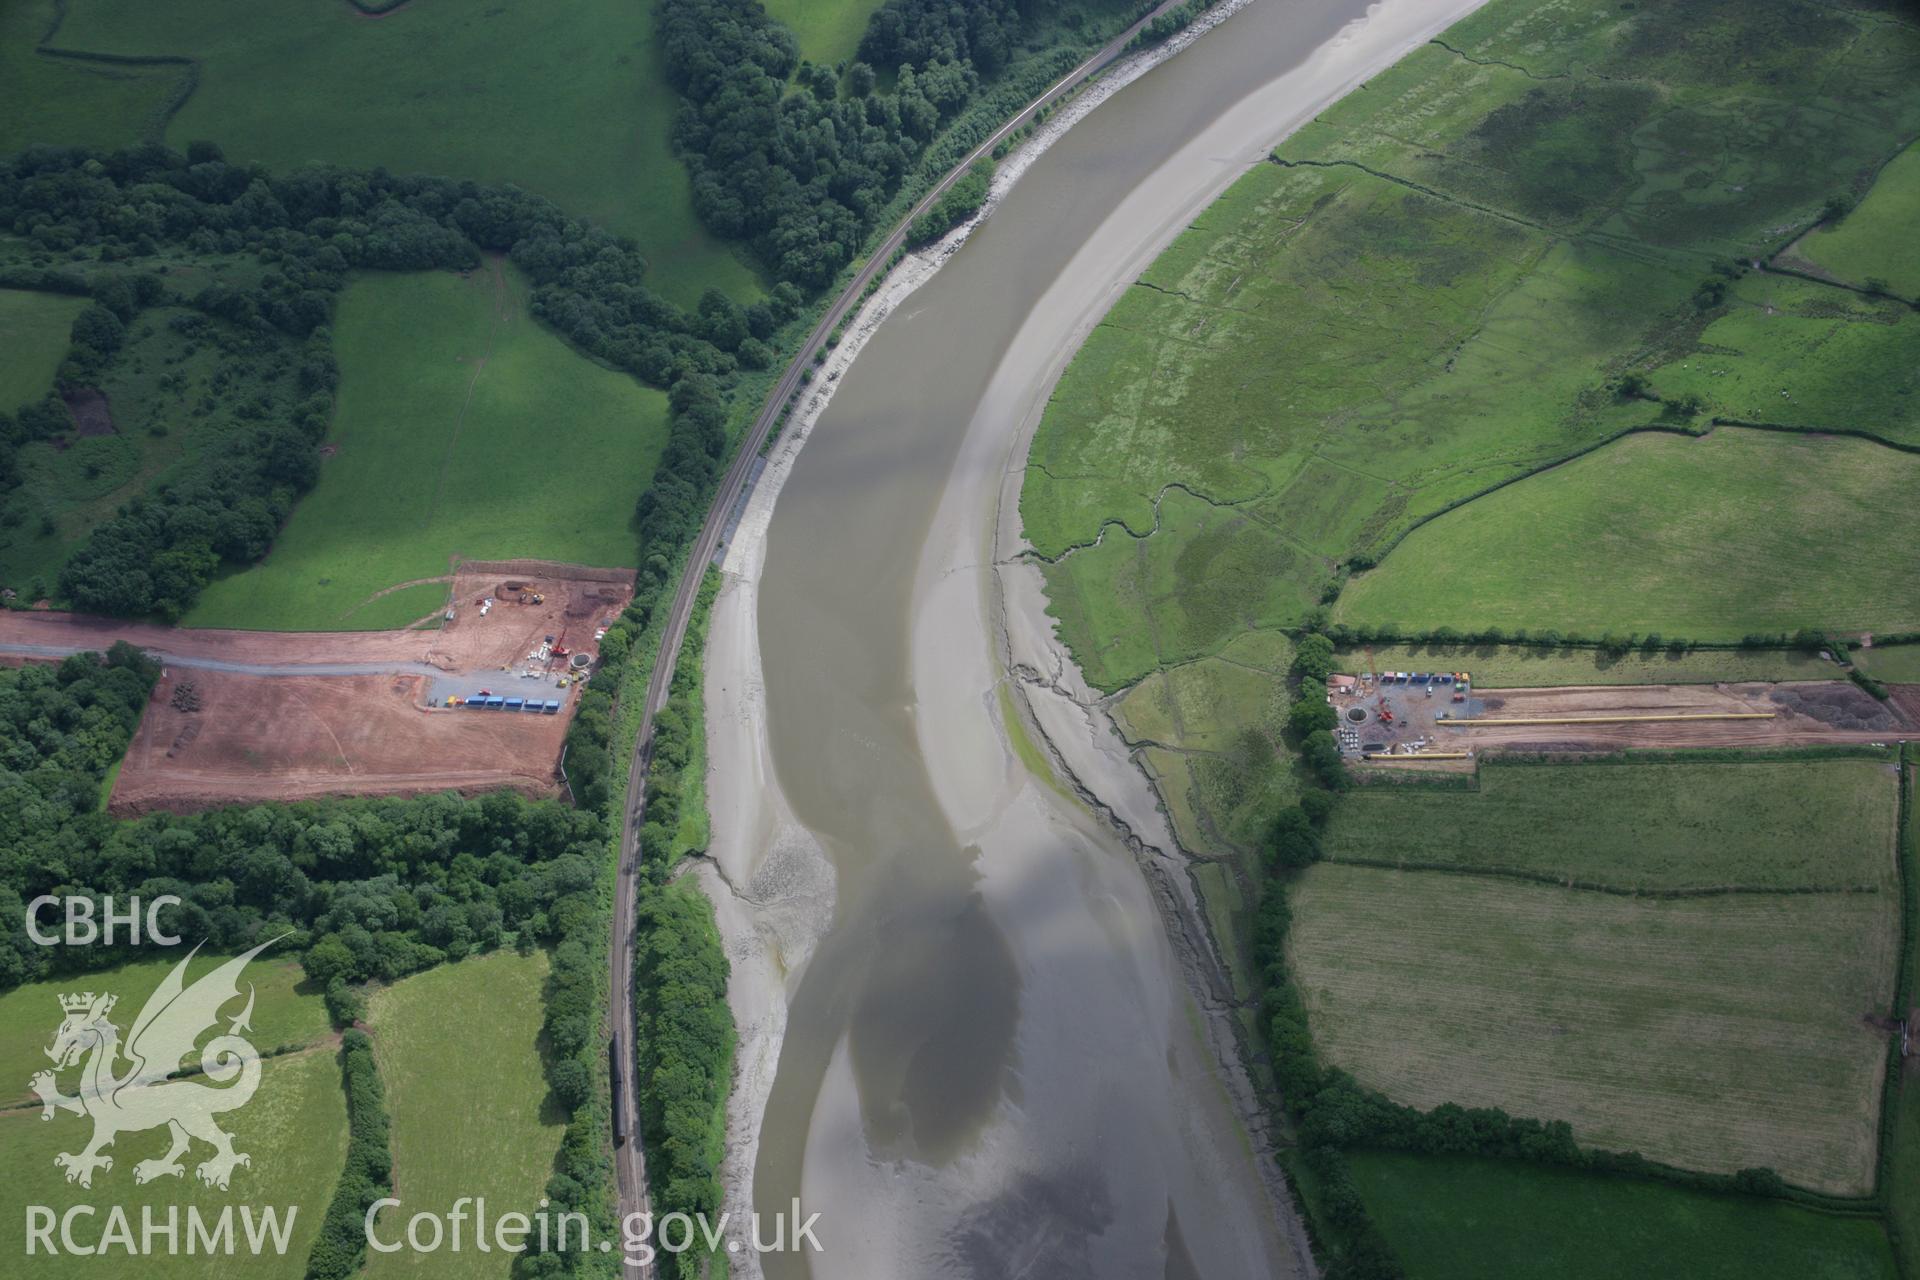 RCAHMW colour oblique aerial photograph of LNG Natural Gas Pipeline crossing of Tywi, Tavernspite. Taken on 11 July 2006 by Toby Driver.